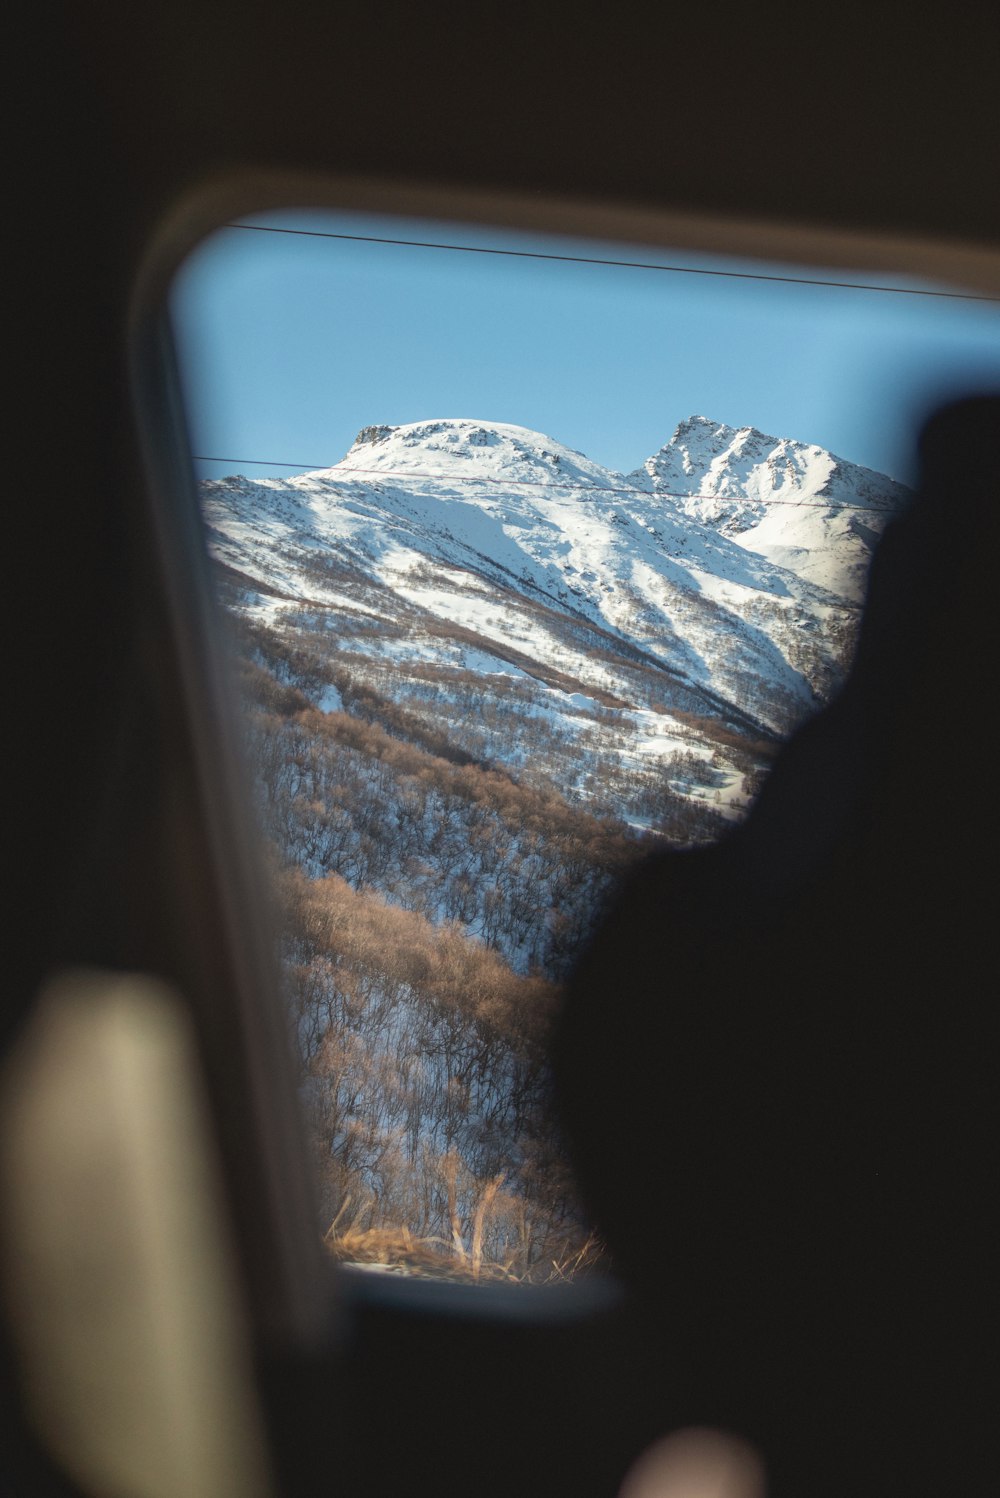 a view of a snowy mountain from inside a vehicle